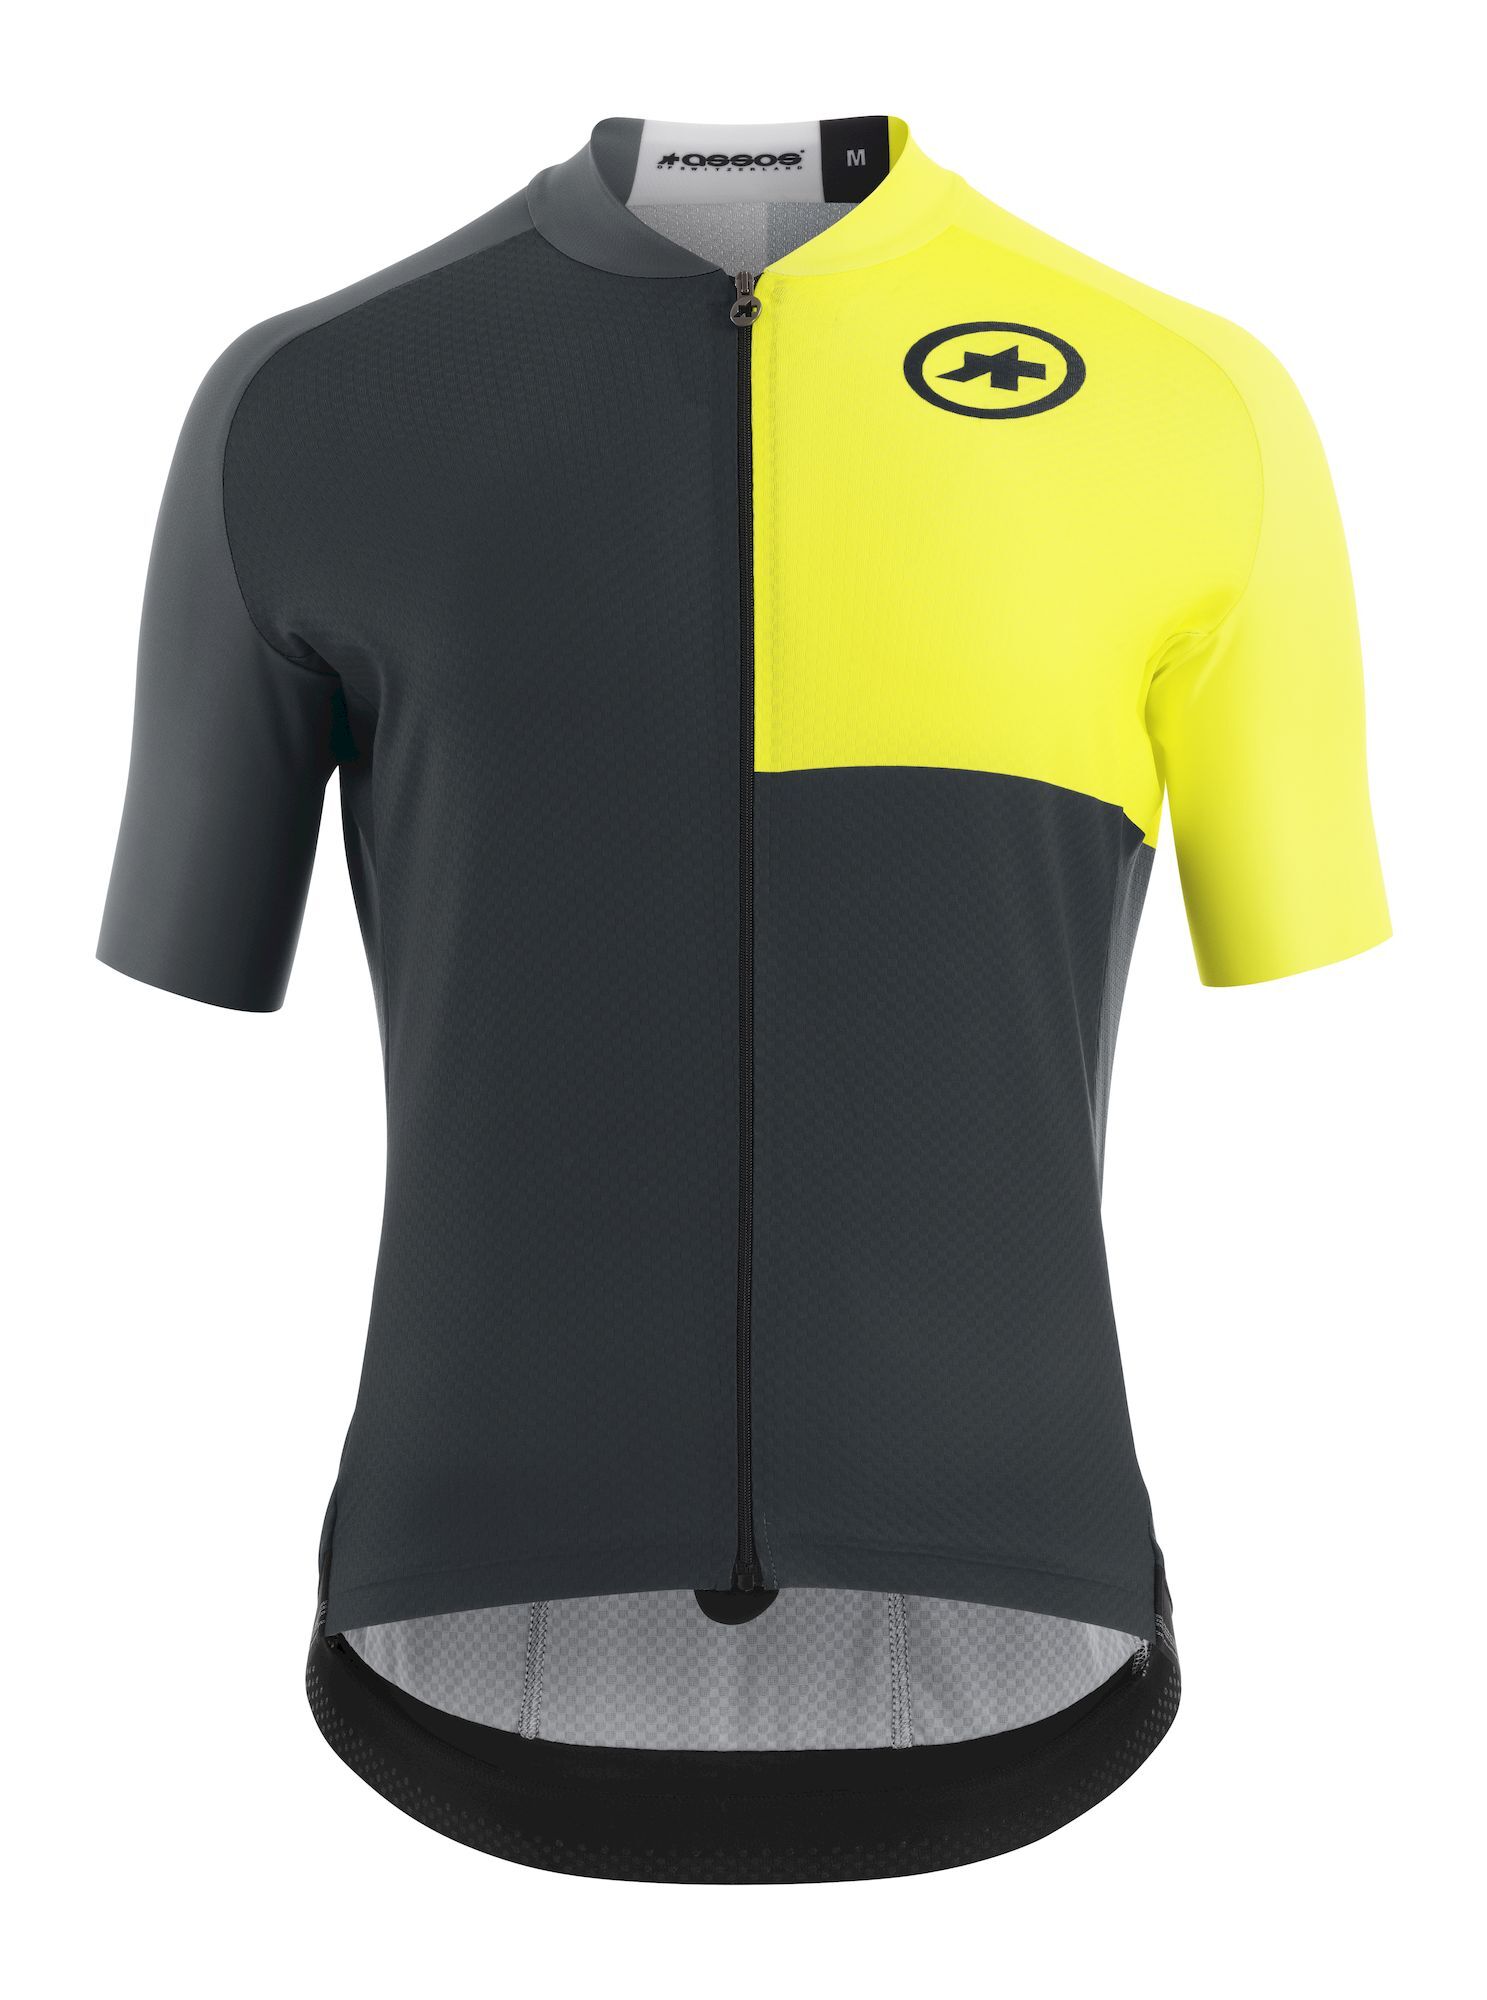 Assos Mille GT Jersey C2 EVO Stahlstern - Maillot vélo homme | Hardloop